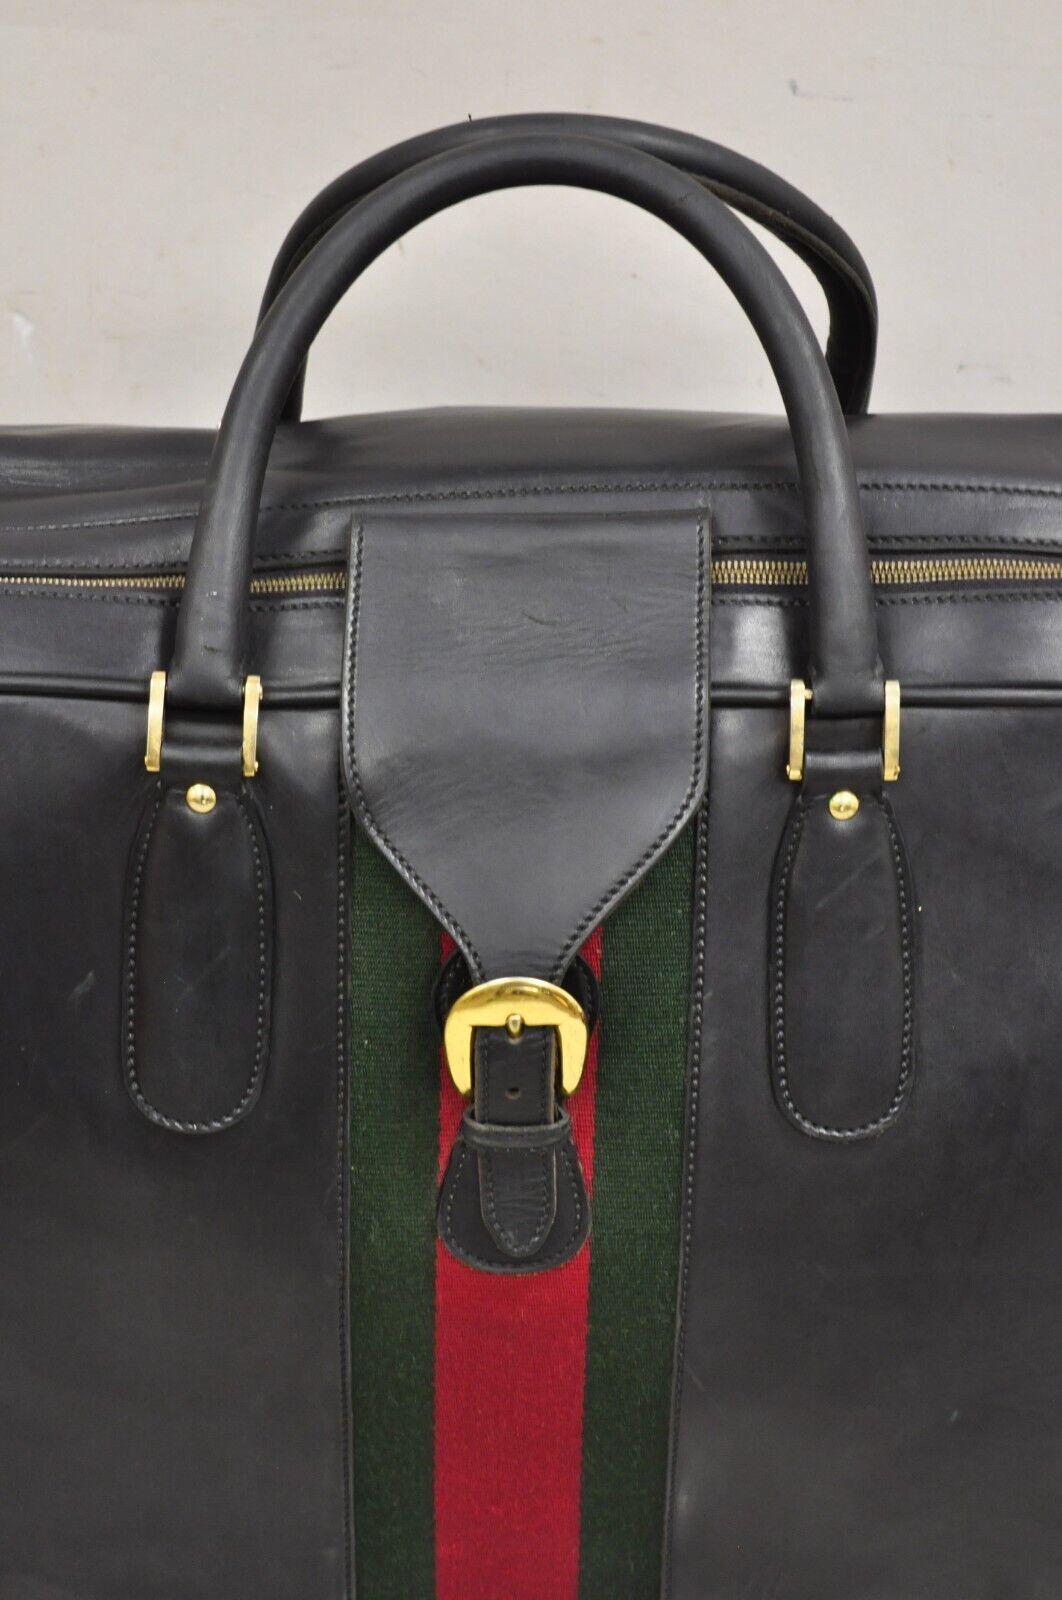 Vintage Gucci Large Black Leather Suitcase Luggage Travel Bag Green Red Webbing In Good Condition For Sale In Philadelphia, PA